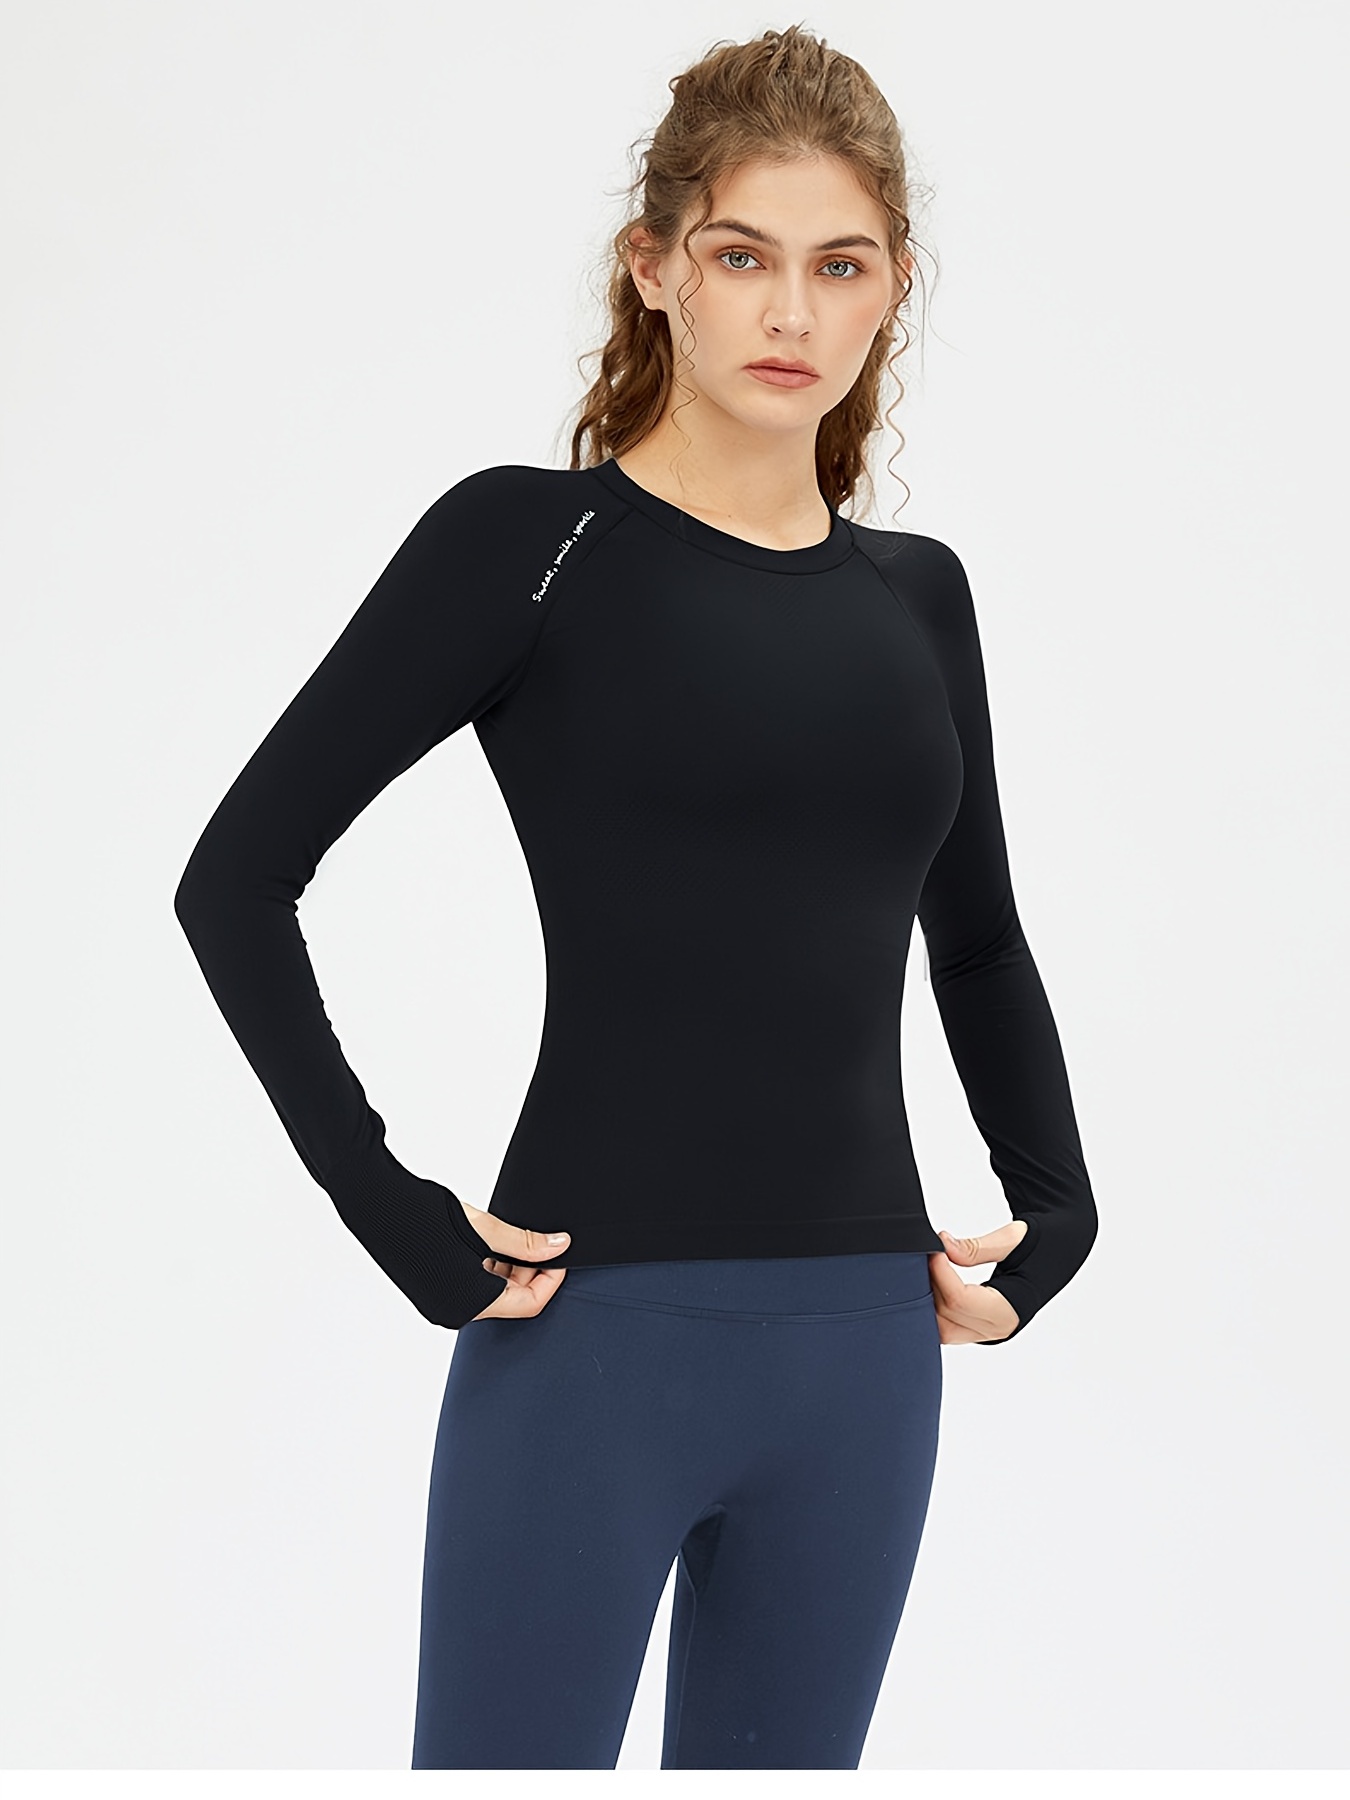 Sports tops for women with chest pads quick-drying fitness wear Slim tight  long-sleeved,Sports Wear & Yoga Wear